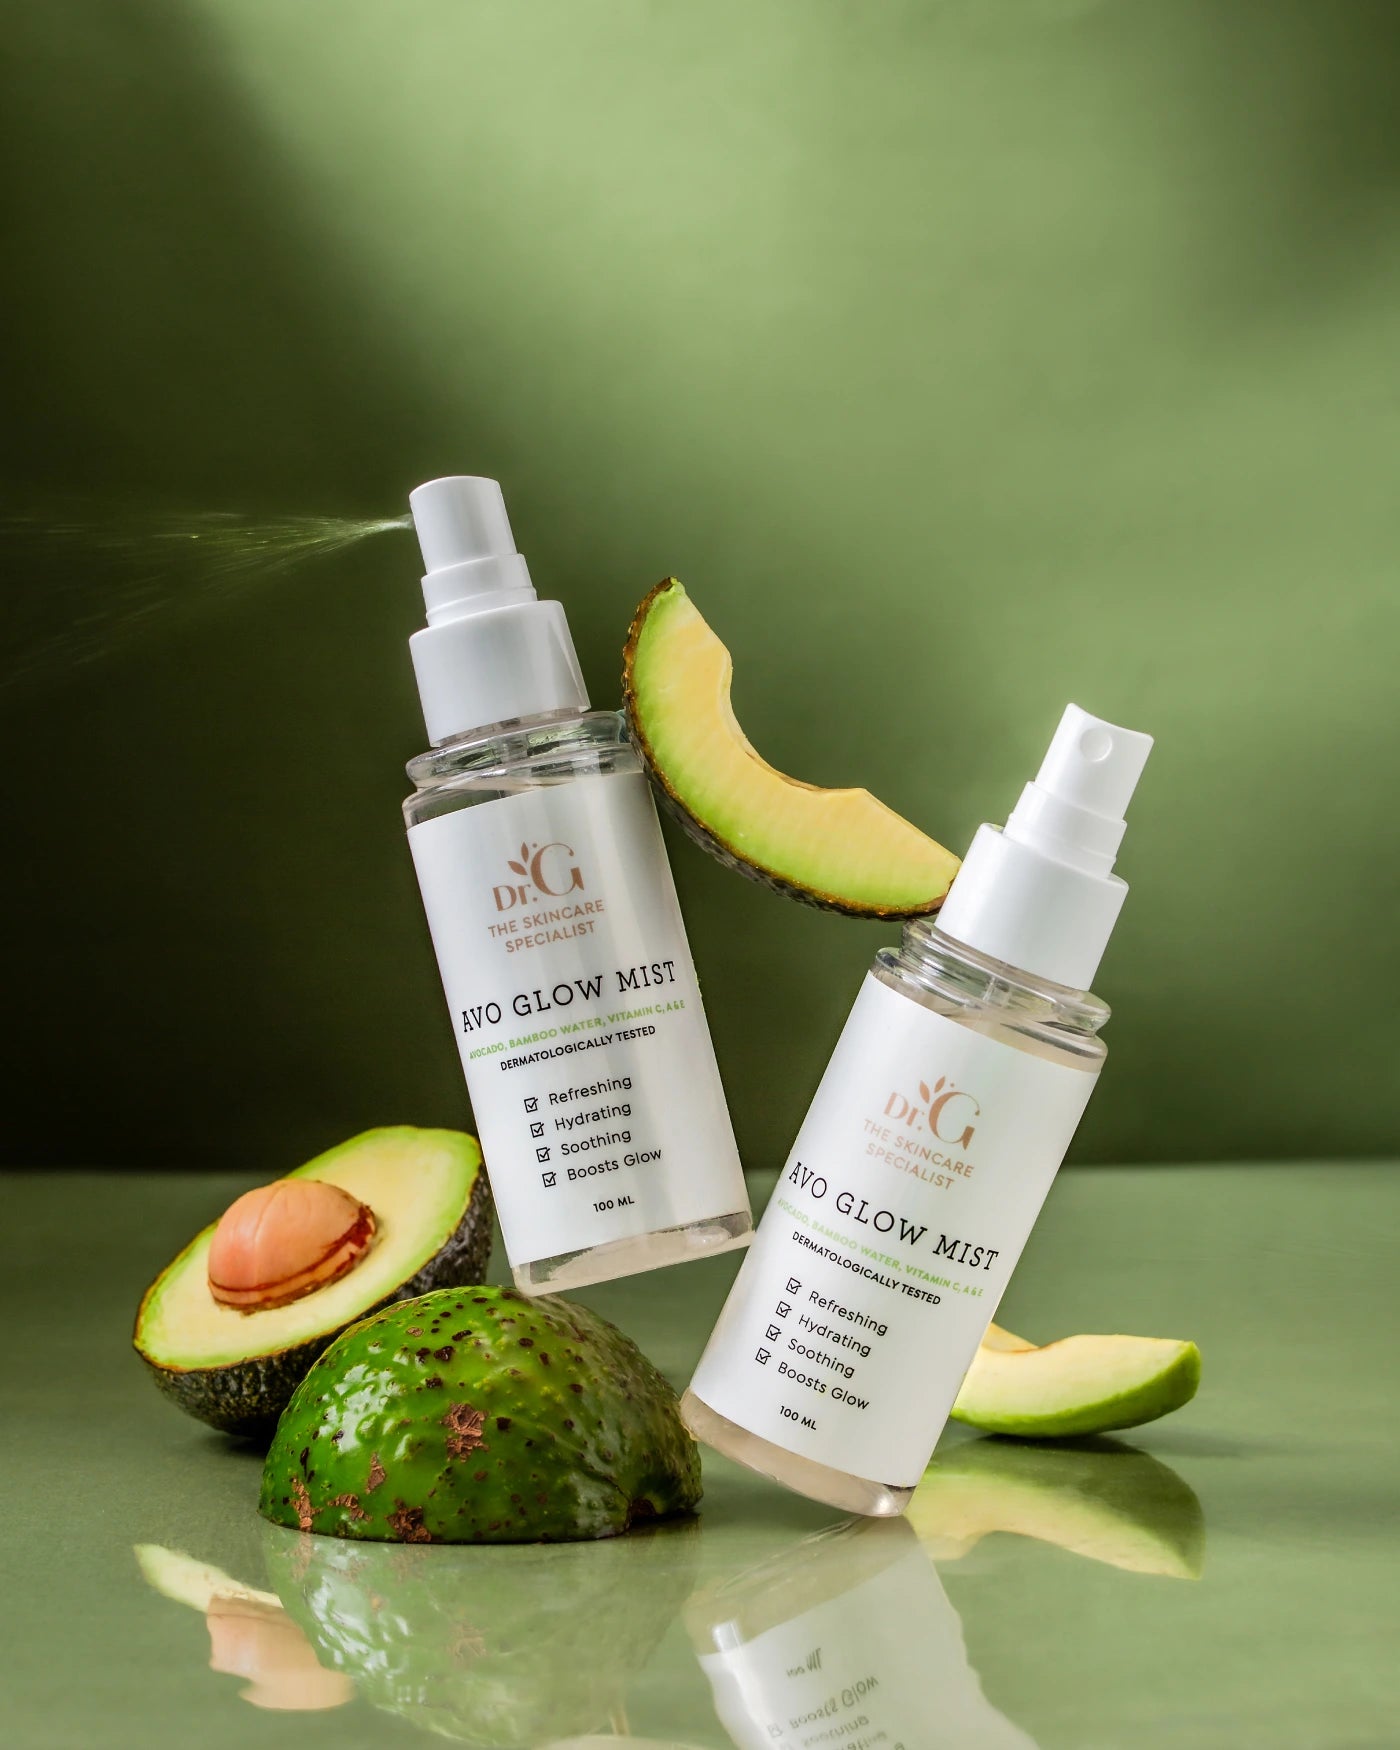 Dr G Avo Glow Facial Mist: Your Secret to Glowing Skin Perfection